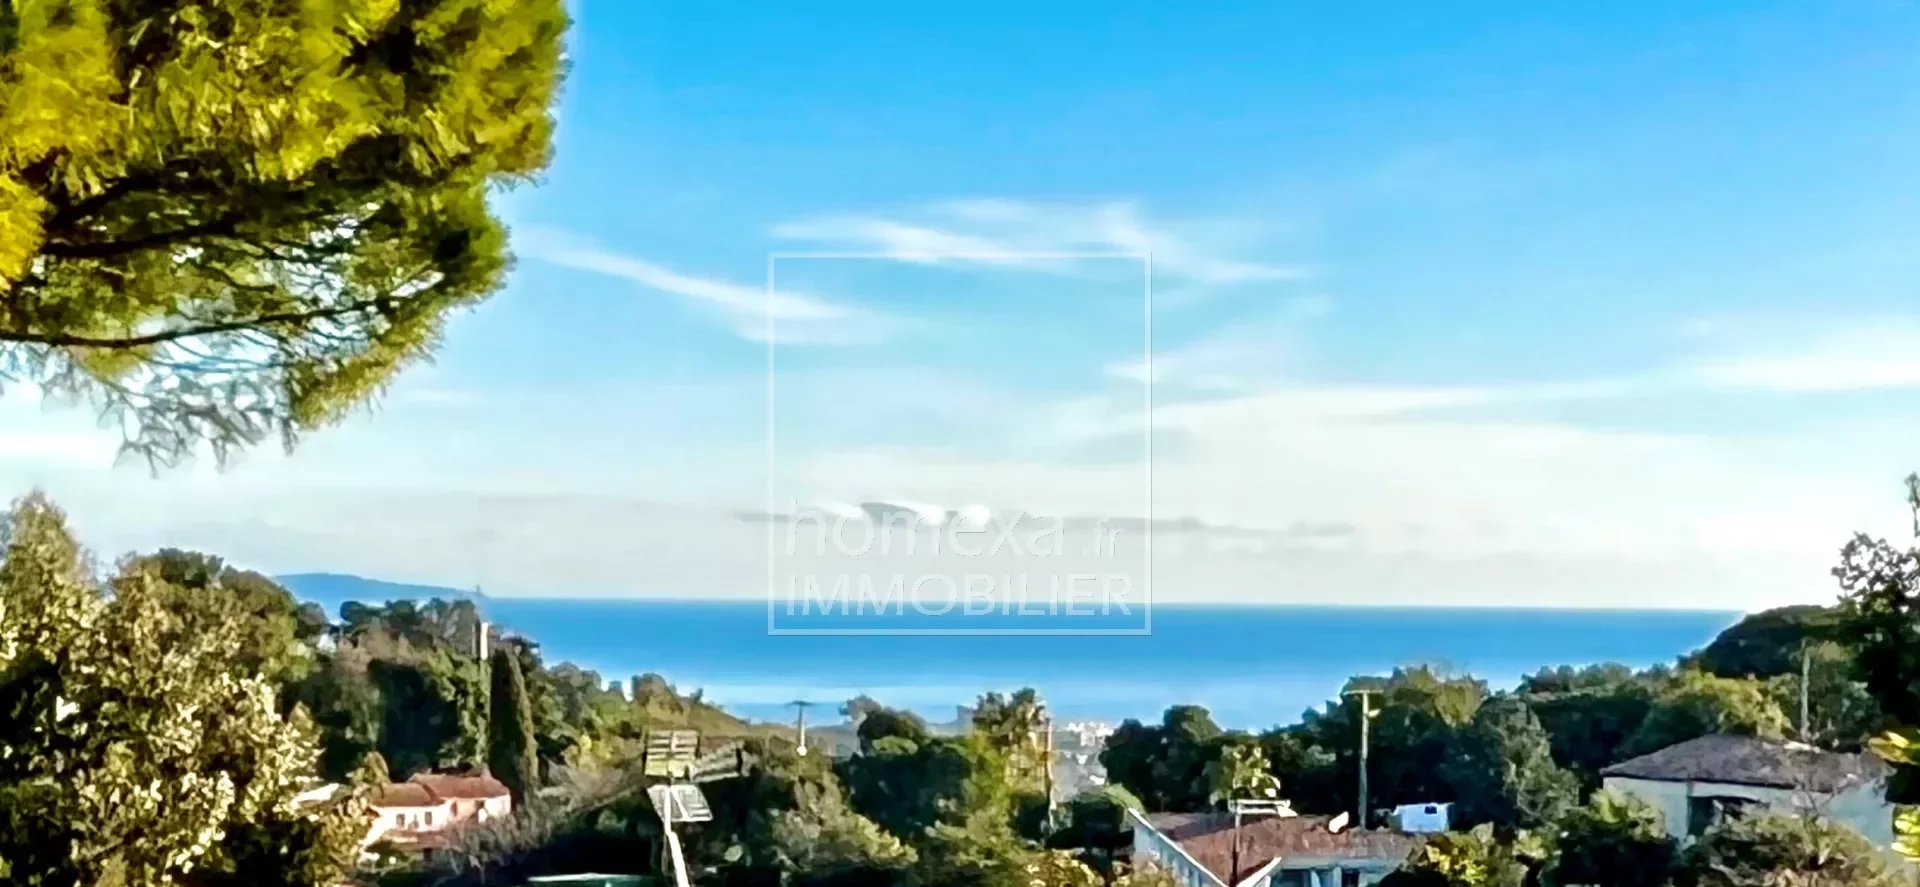 French riviera holiday rental : house in Antibes in private gated domain with pool and tennis